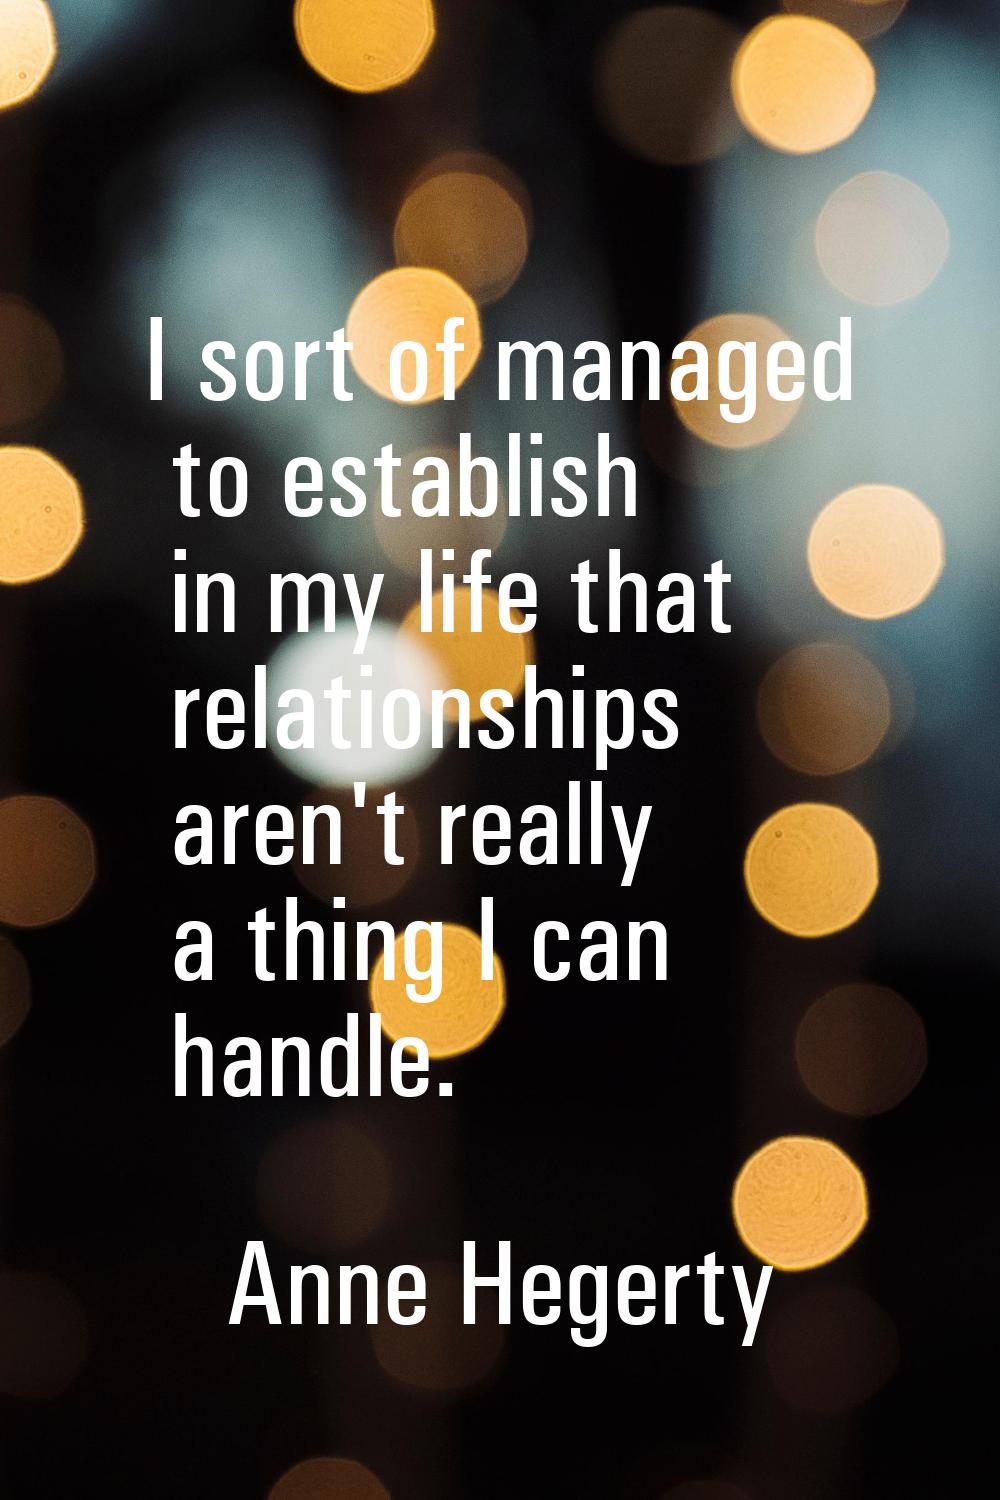 I sort of managed to establish in my life that relationships aren't really a thing I can handle.